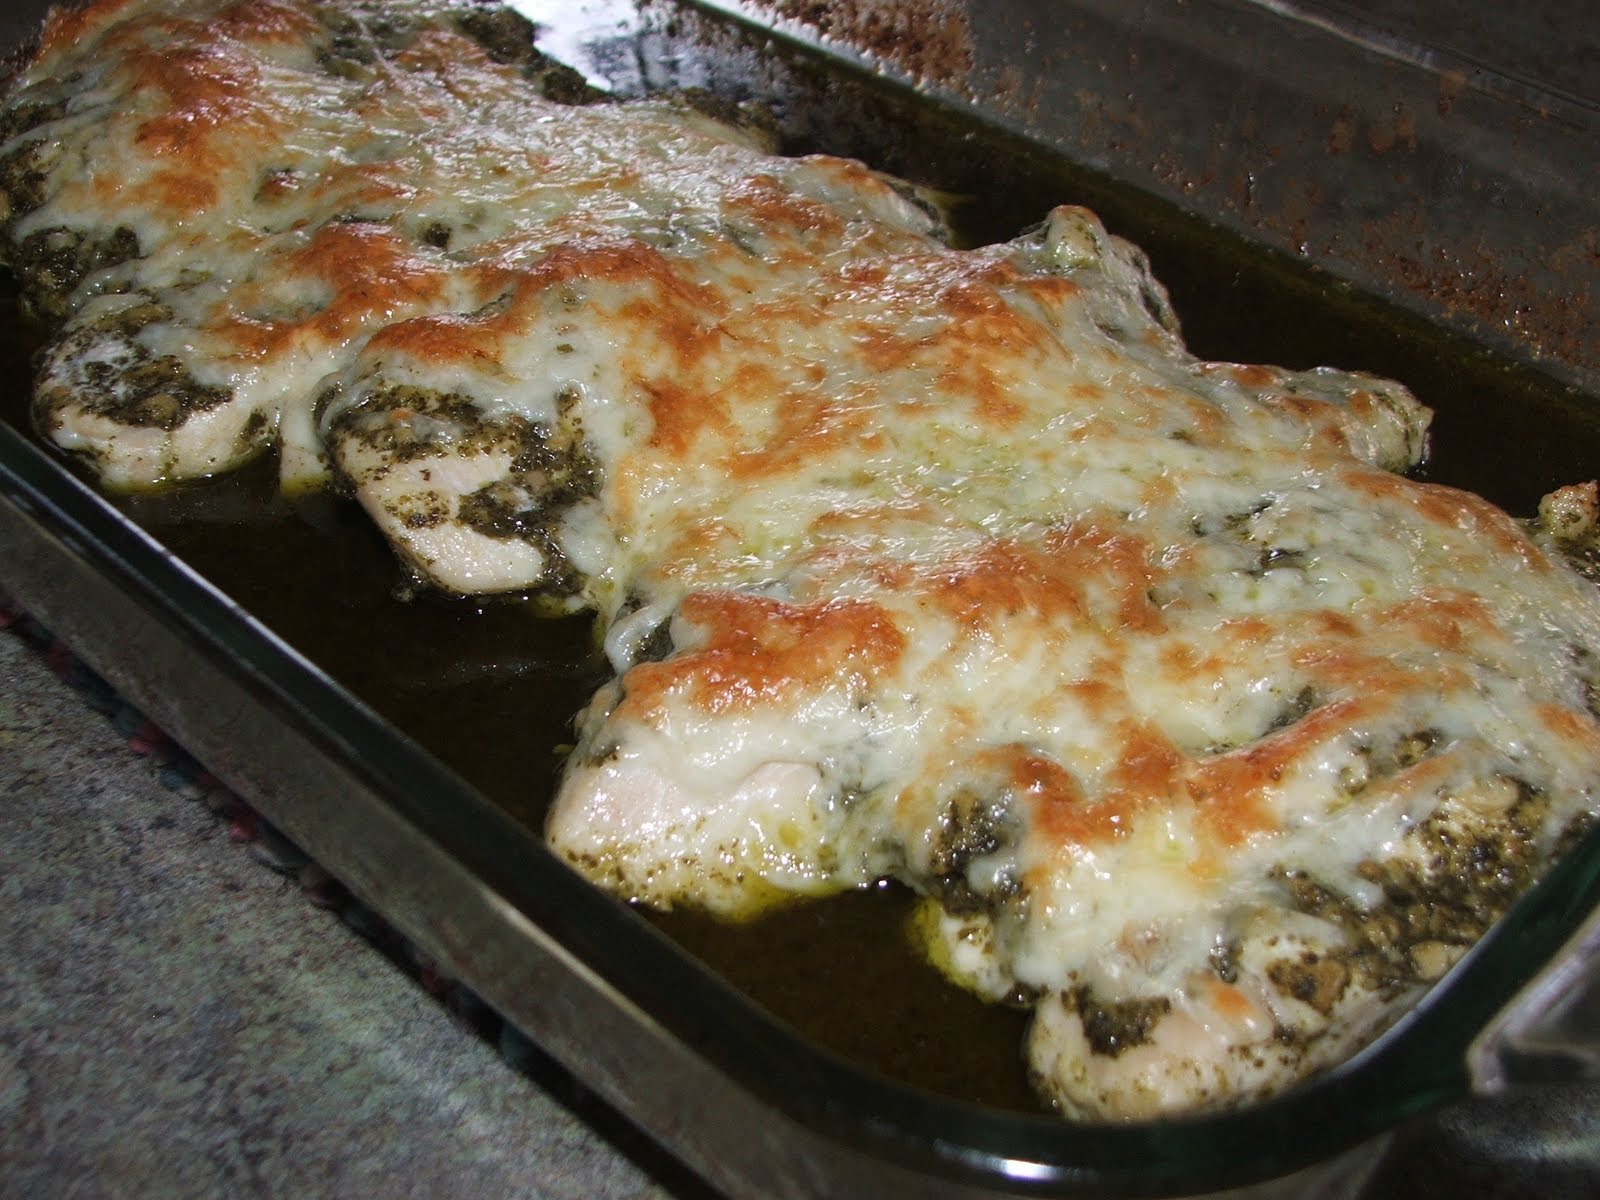 Double the Deliciousness: Baked Chicken Pesto